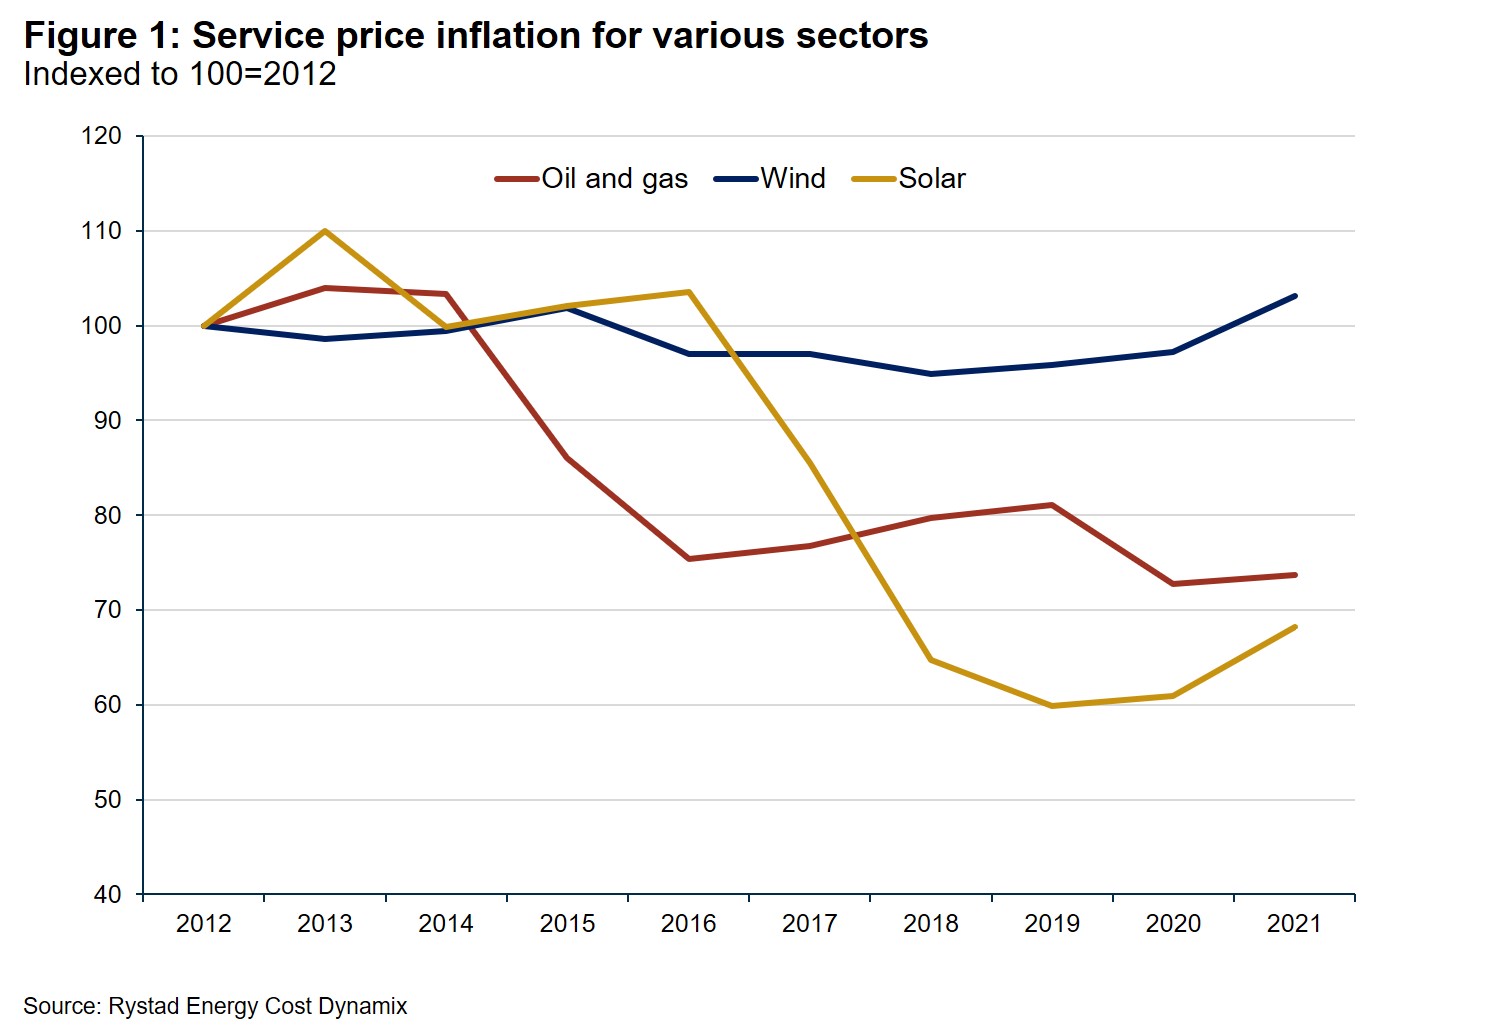 20210824_CostSolutions_Renewable energy inflation_Fig1.jpg